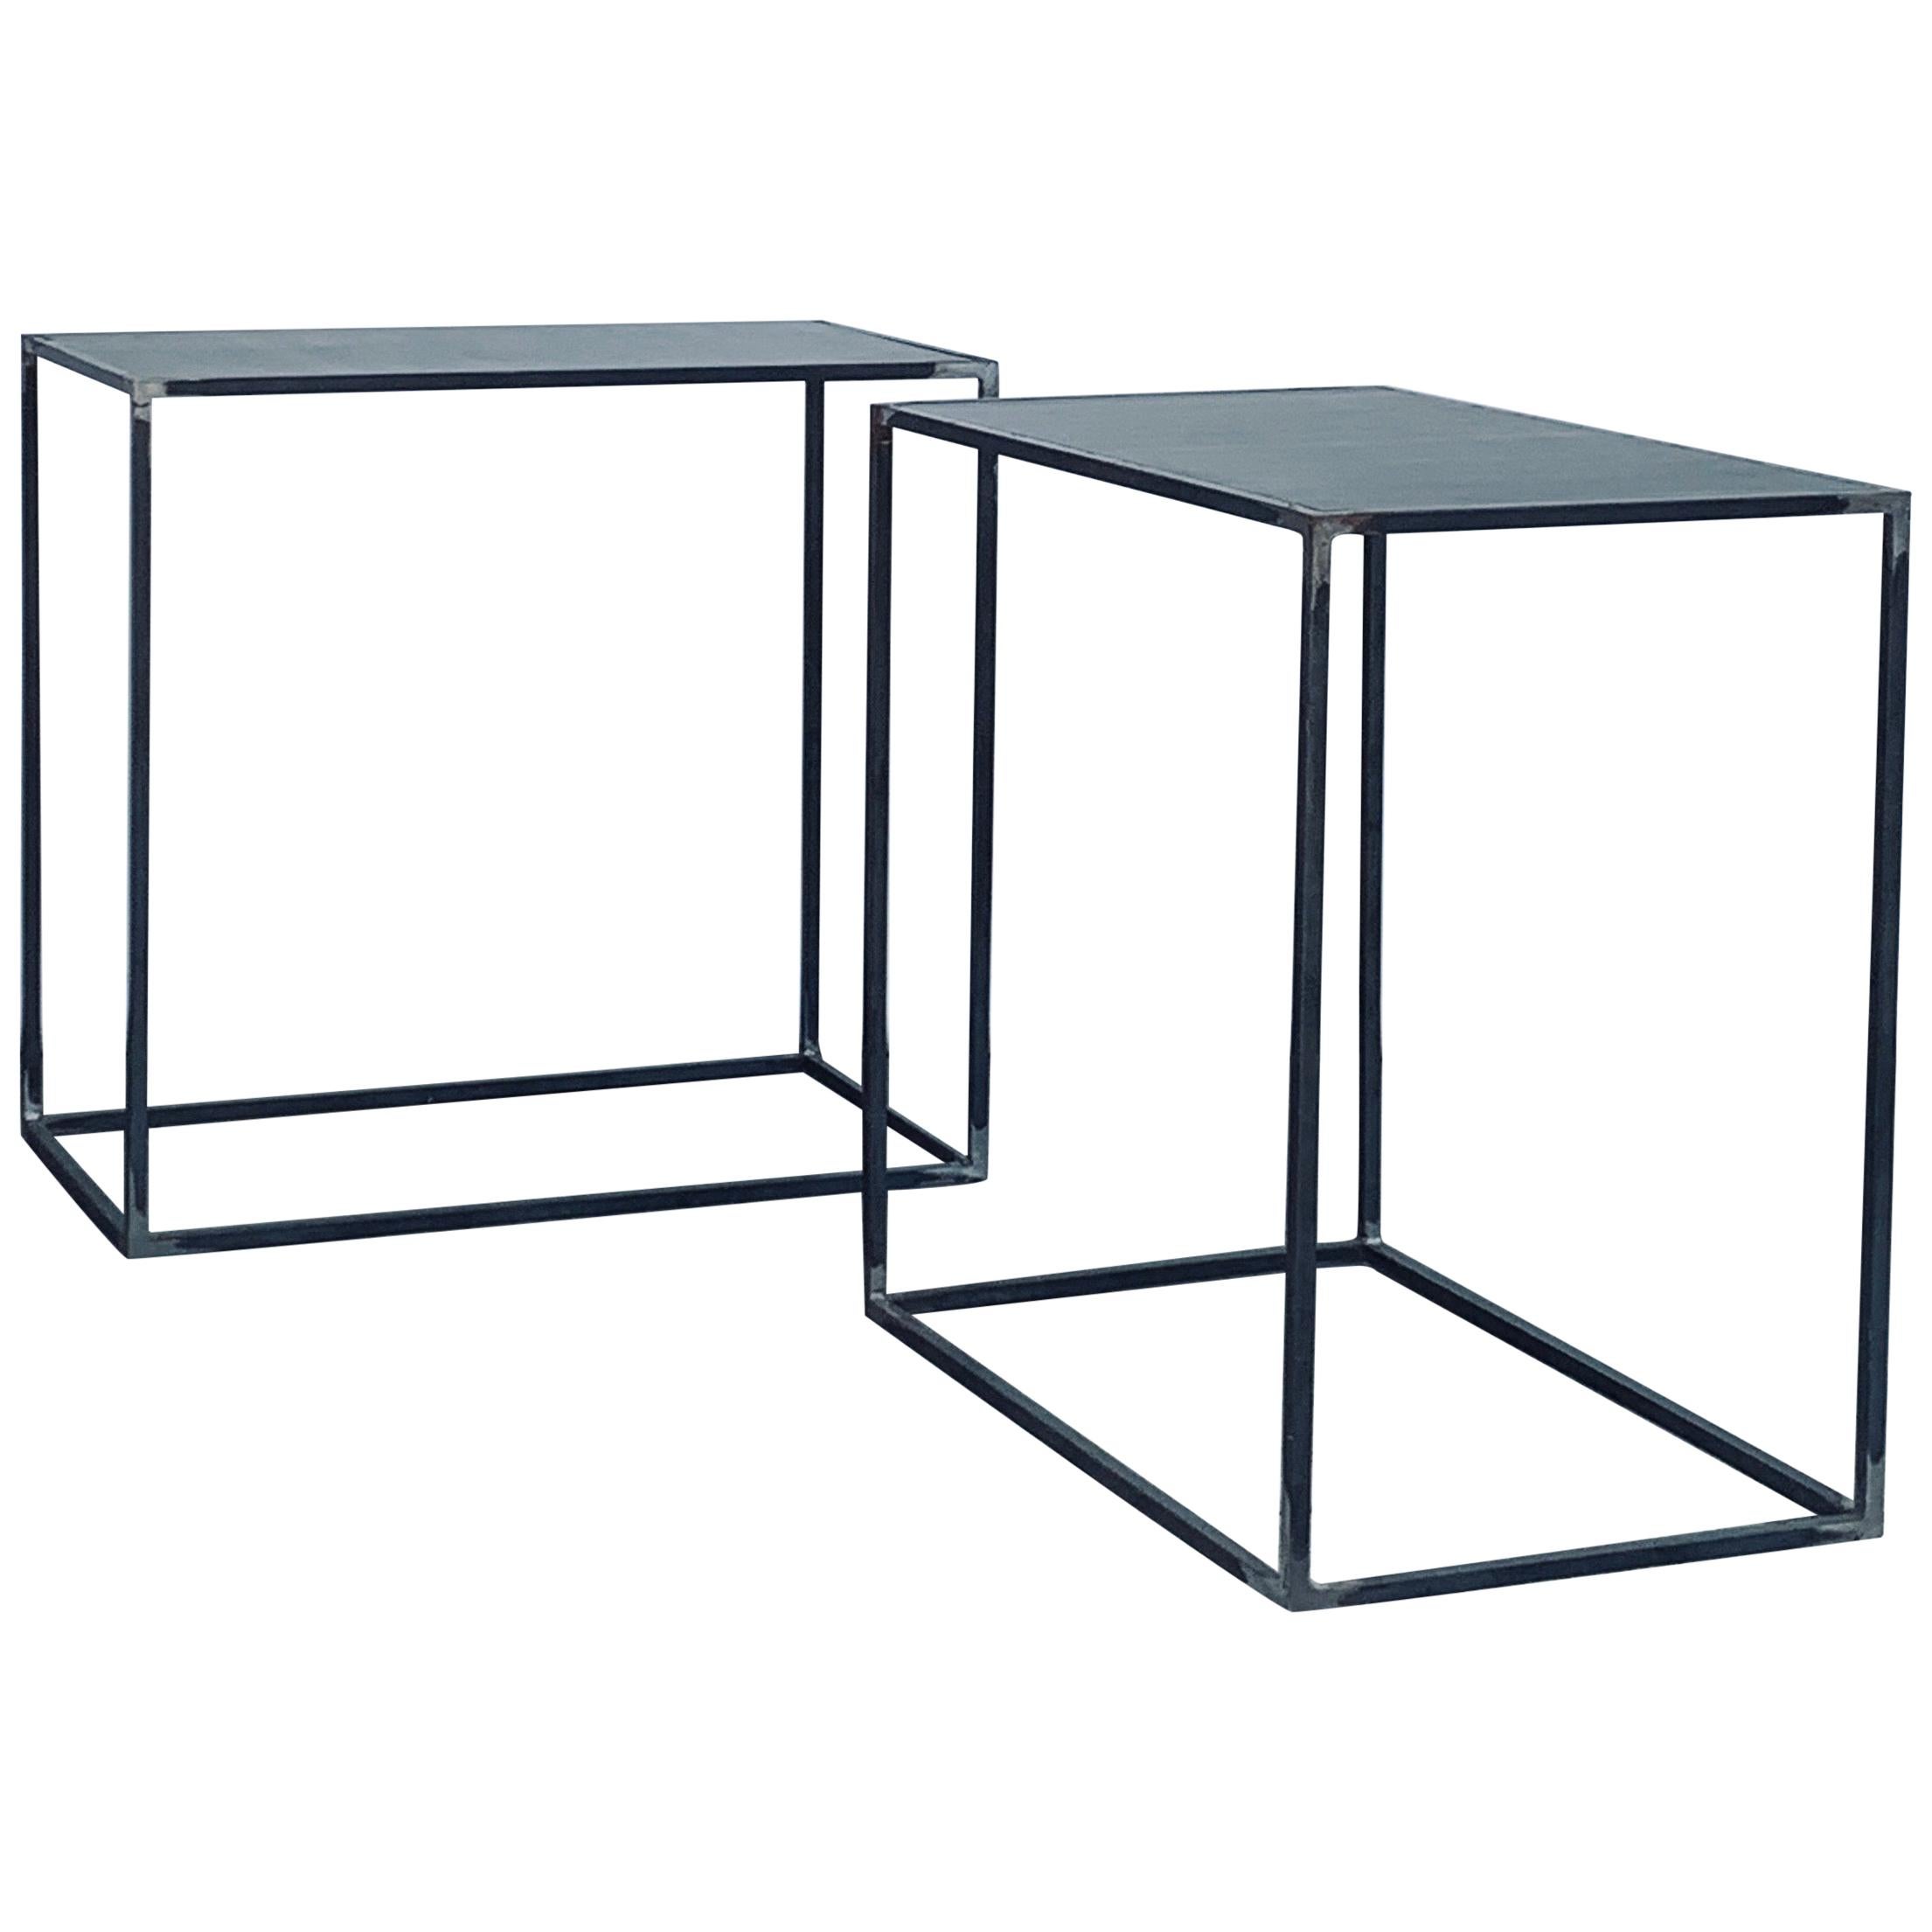 Pair of 'Filiforme' Patinated Steel Minimalist Side Tables by Design Frères